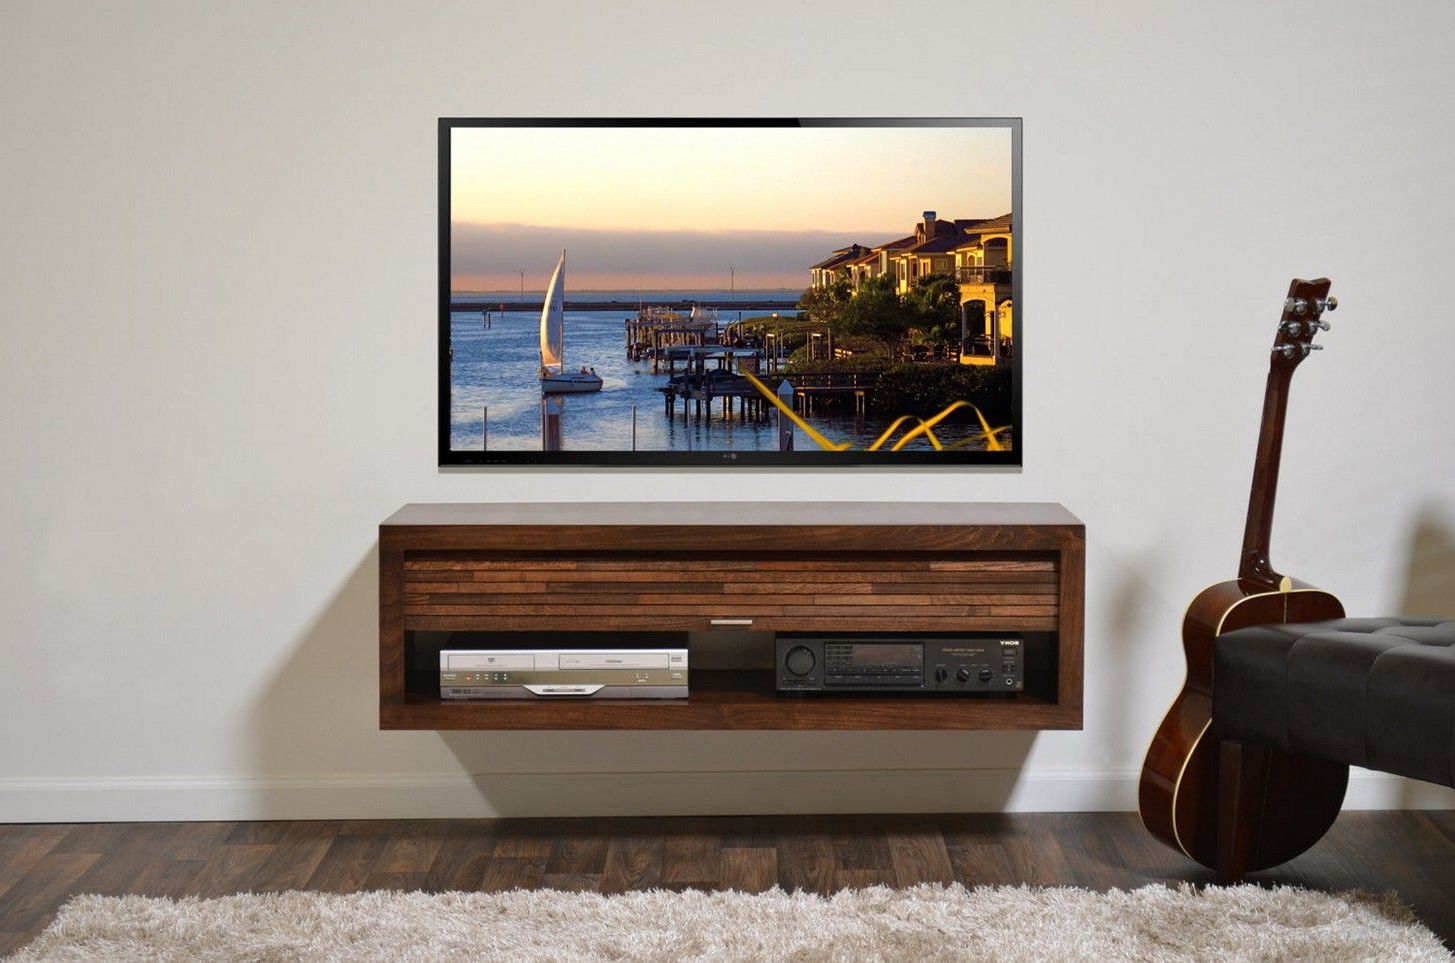 Diy Tv Stand Endless Choices For Your Room Interior With Regard To Alden Design Wooden Tv Stands With Storage Cabinet Espresso (Gallery 5 of 20)